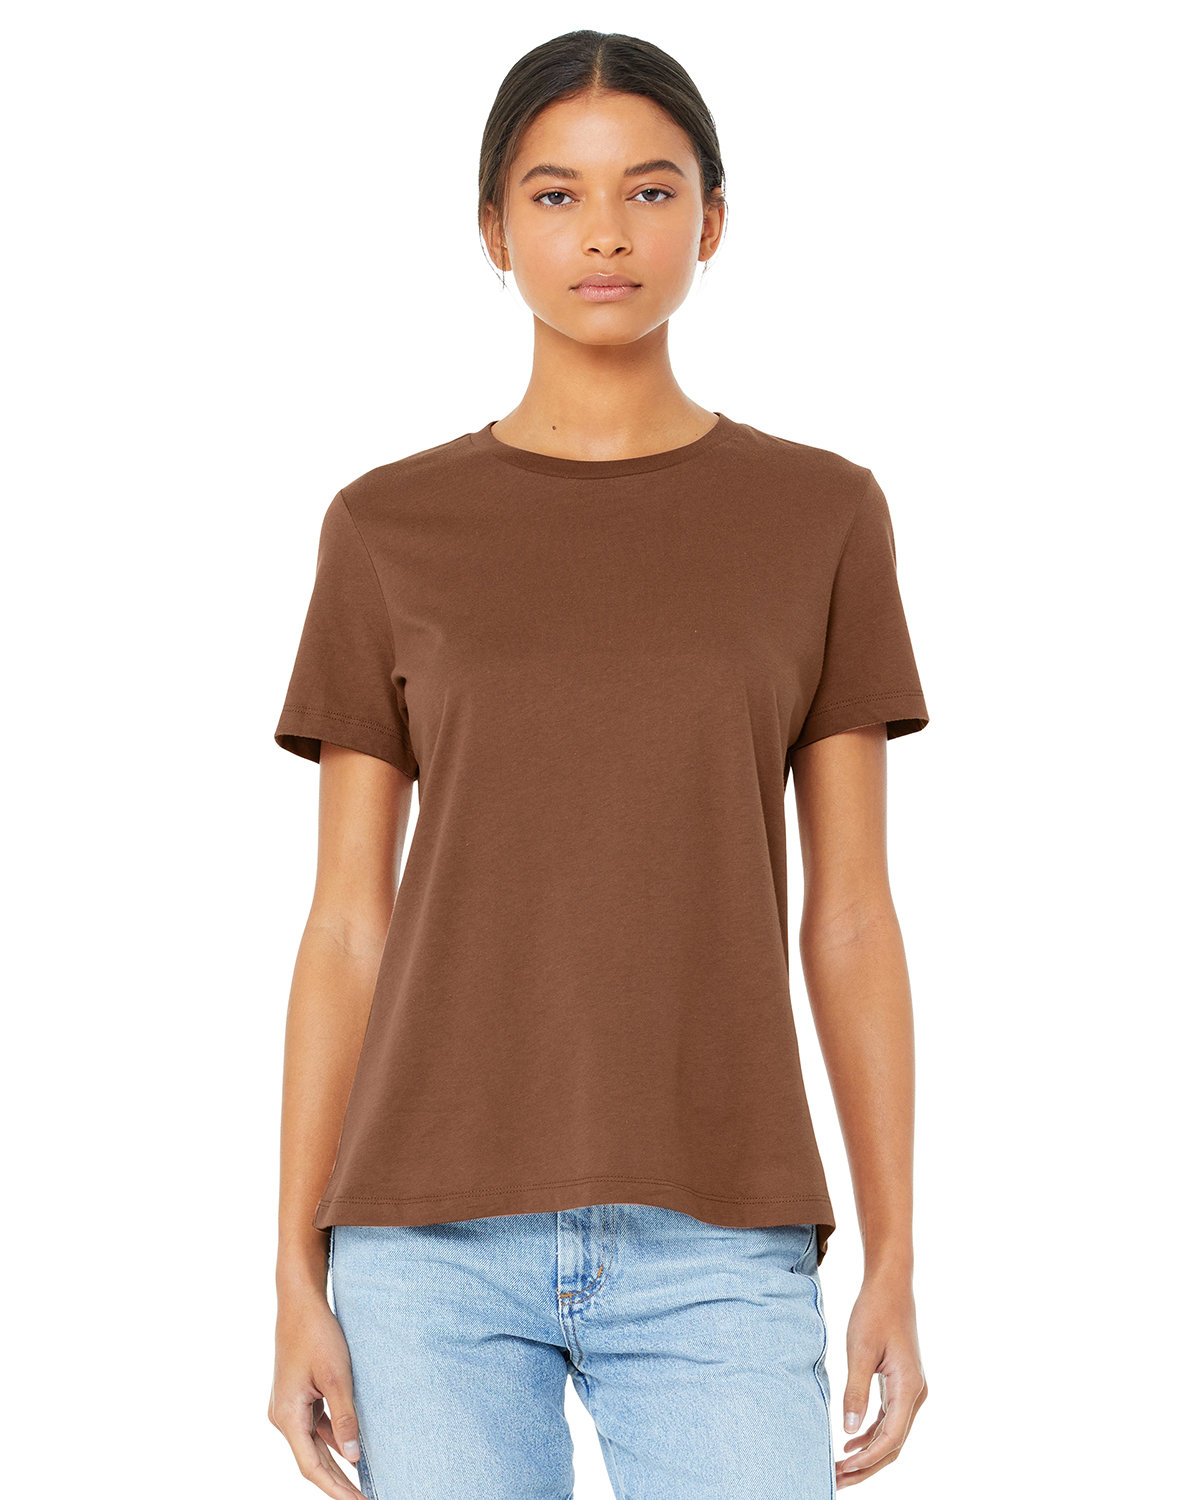 Bella + Canvas Ladies' Relaxed Jersey Short-Sleeve T-Shirt CHESTNUT 